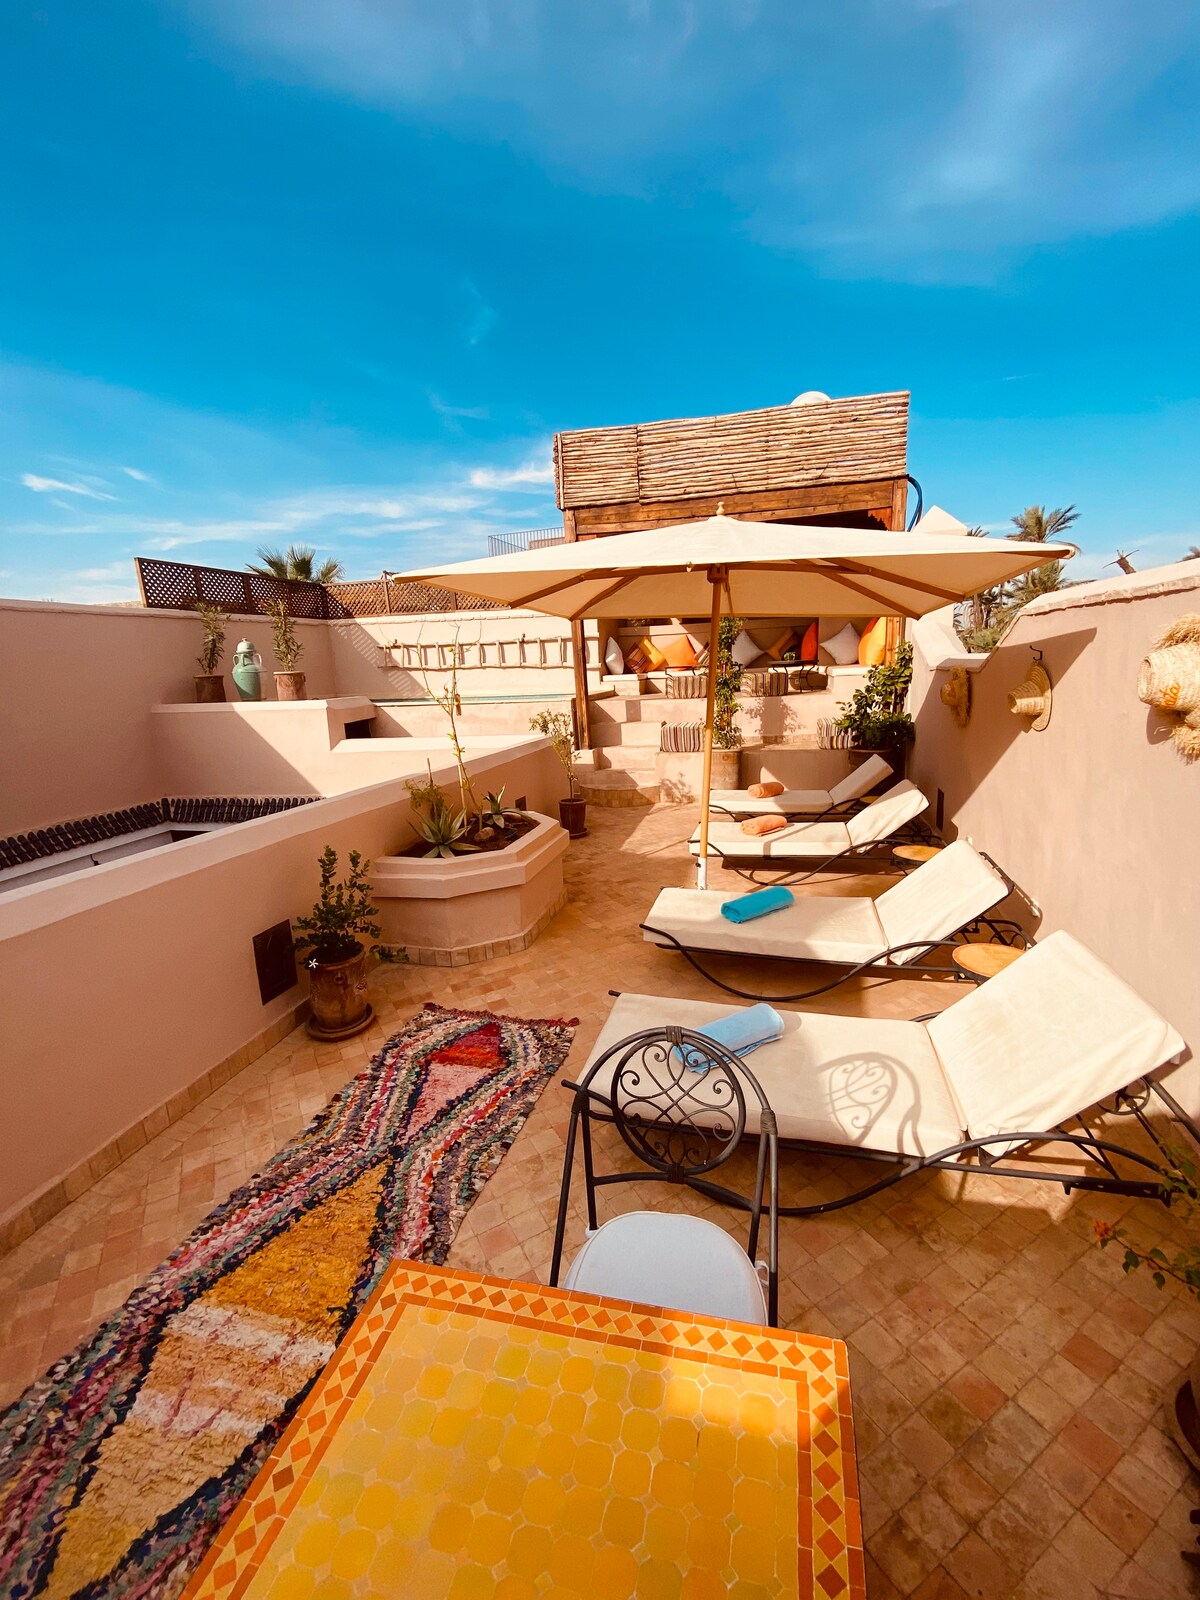 Riad Limonata, Entire Private House, Rooftop Pool